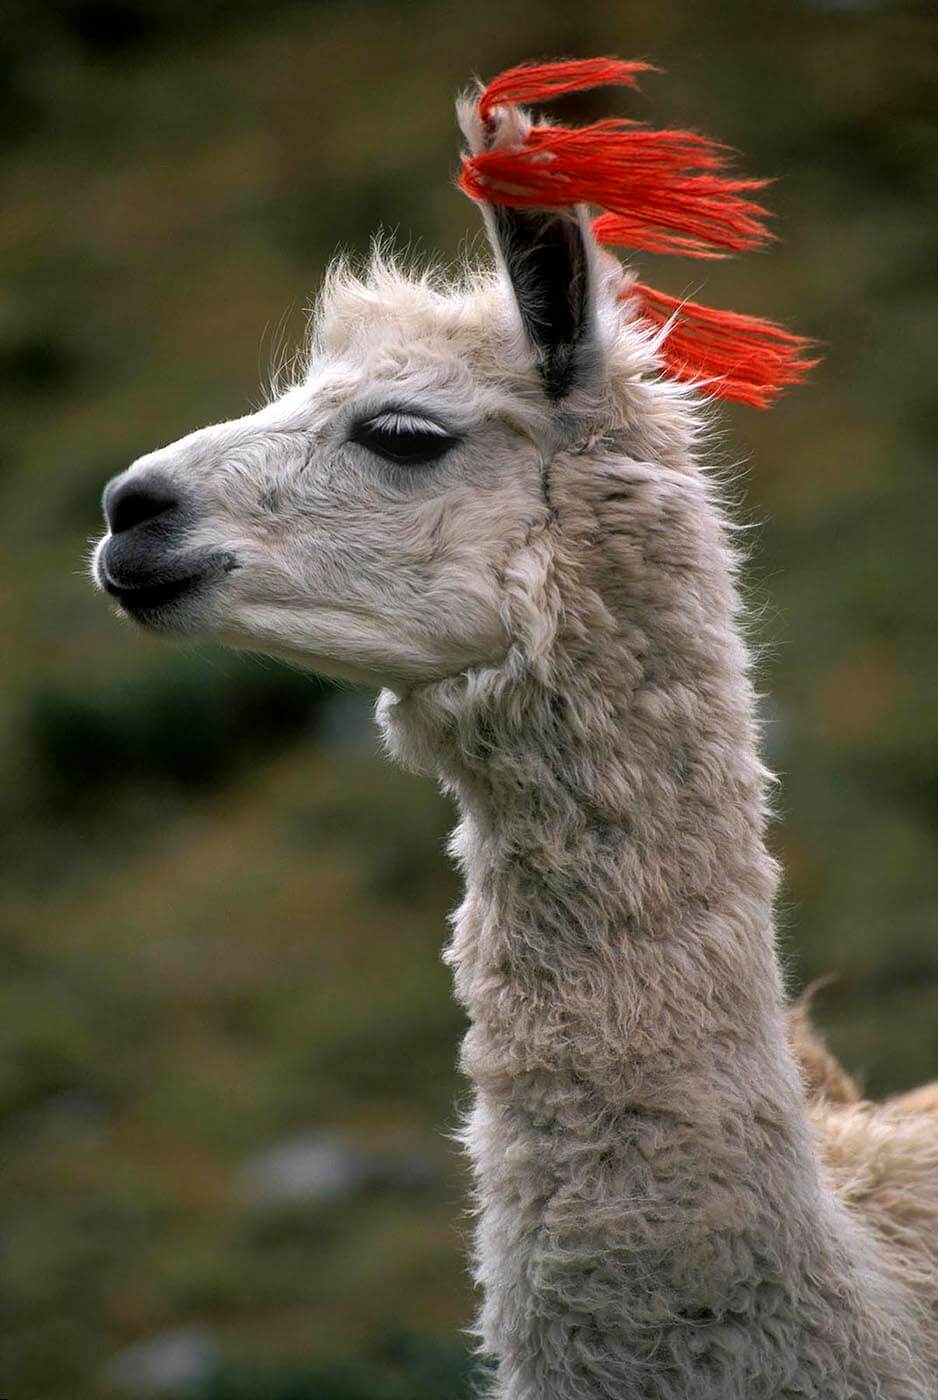 Close-up of white LLAMA with tassels at LLULLUCHAPAMPA (12,000 ft.) on the INCA TRAIL to MACHU PICCHU in PERU. - Agriculture photography by Craig Lovell